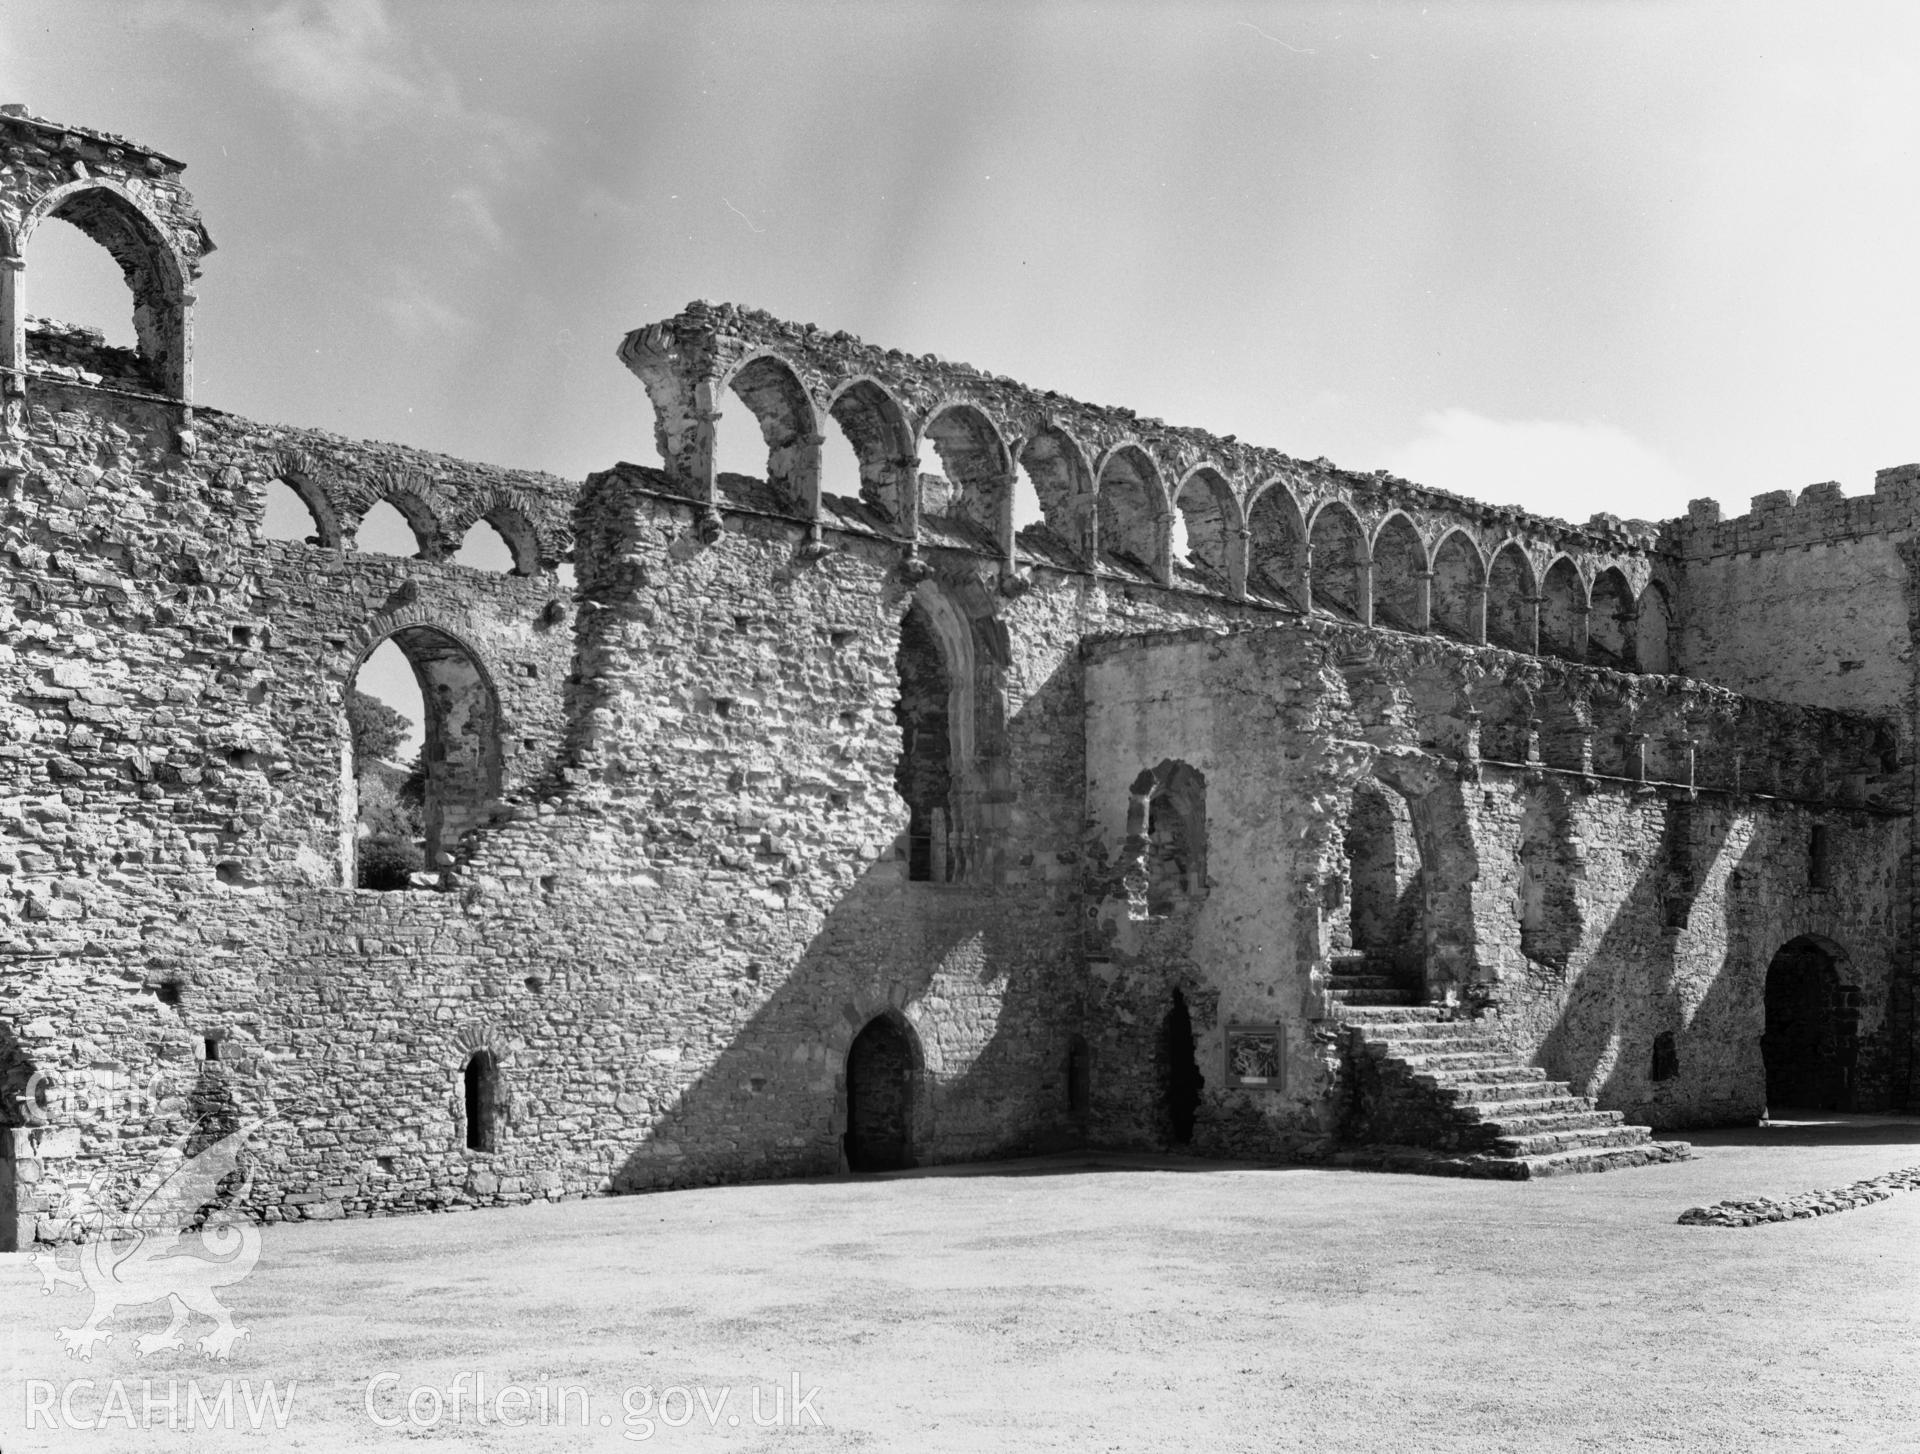 View of the ruins of the Bishops Palace, St Davids, taken 14.09.67.